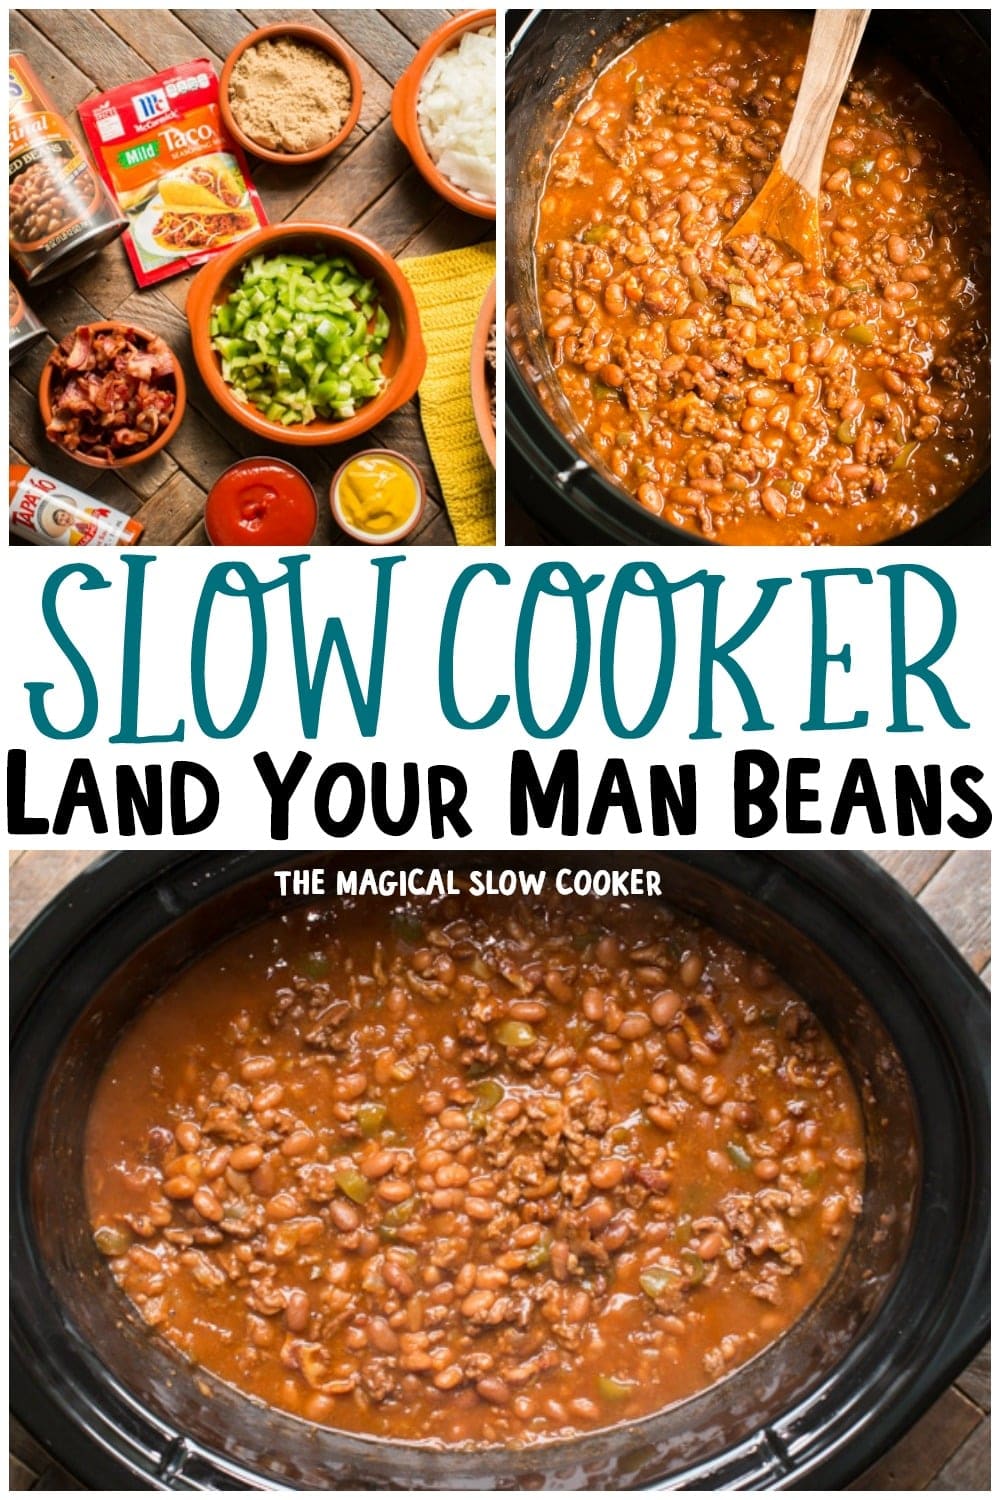 Slow Cooker Land Your Man Baked Beans | Recipe | Crockpot recipes slow cooker, Slow cooker baked beans, Baked beans